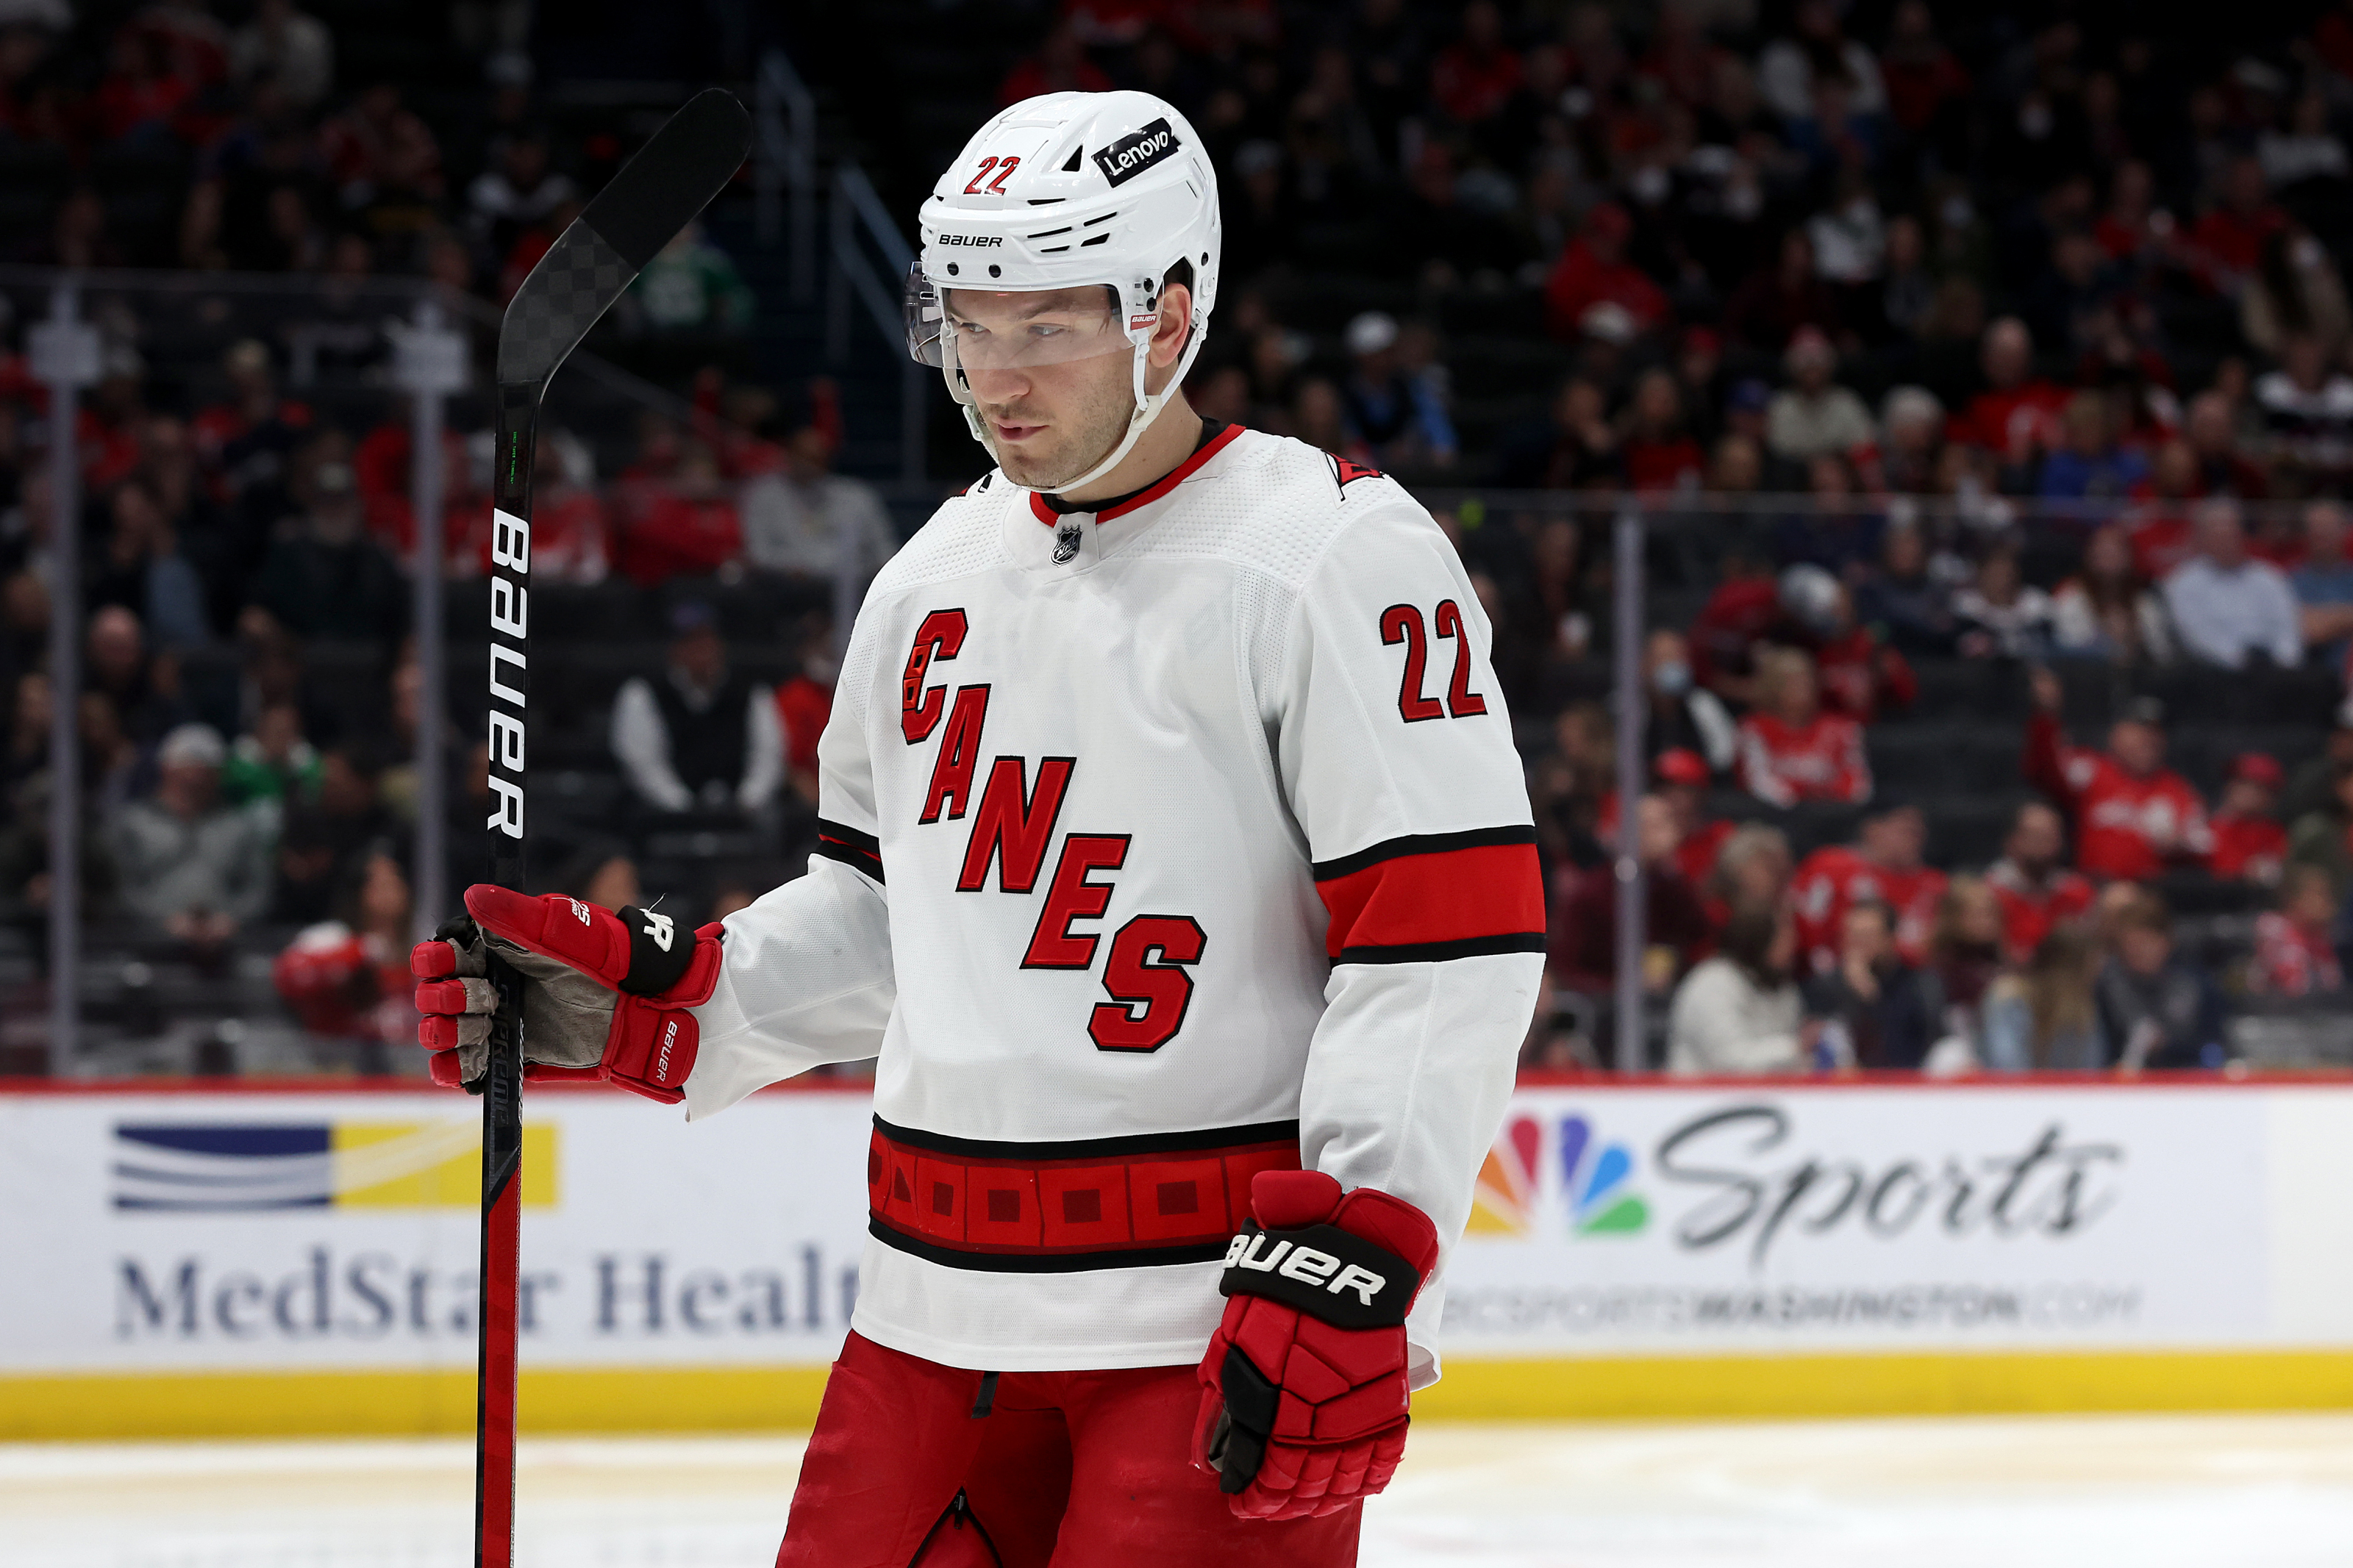 Which players who have played for the Carolina Hurricanes and been